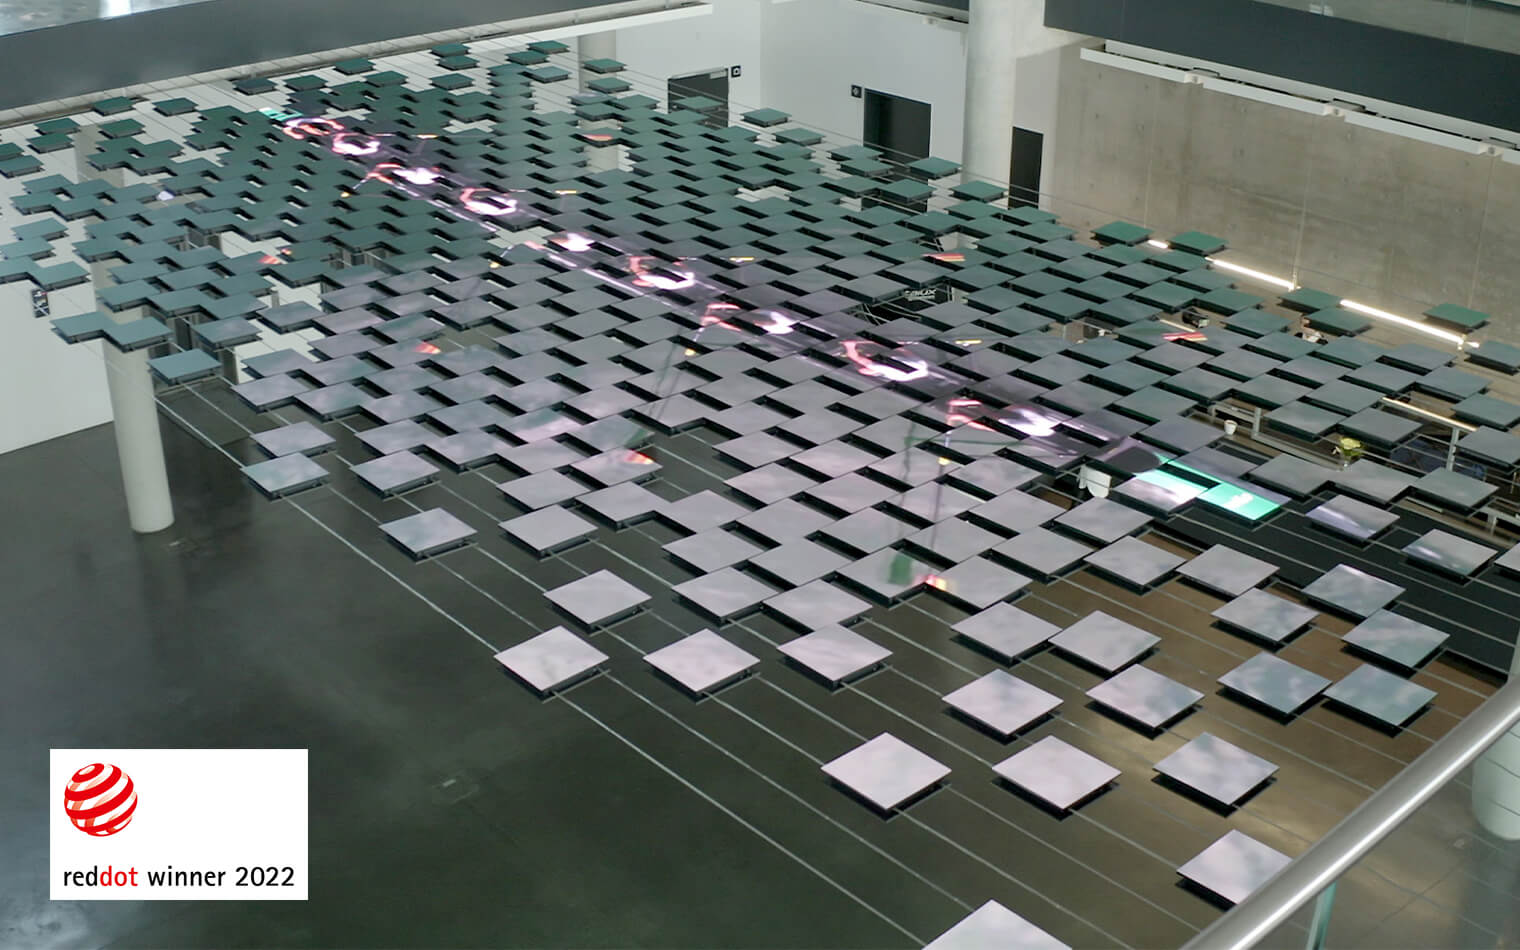 Digital art installation Wilo Connected from above with the Red Dot Award 2022 logo and the representation of the Germany Eight.